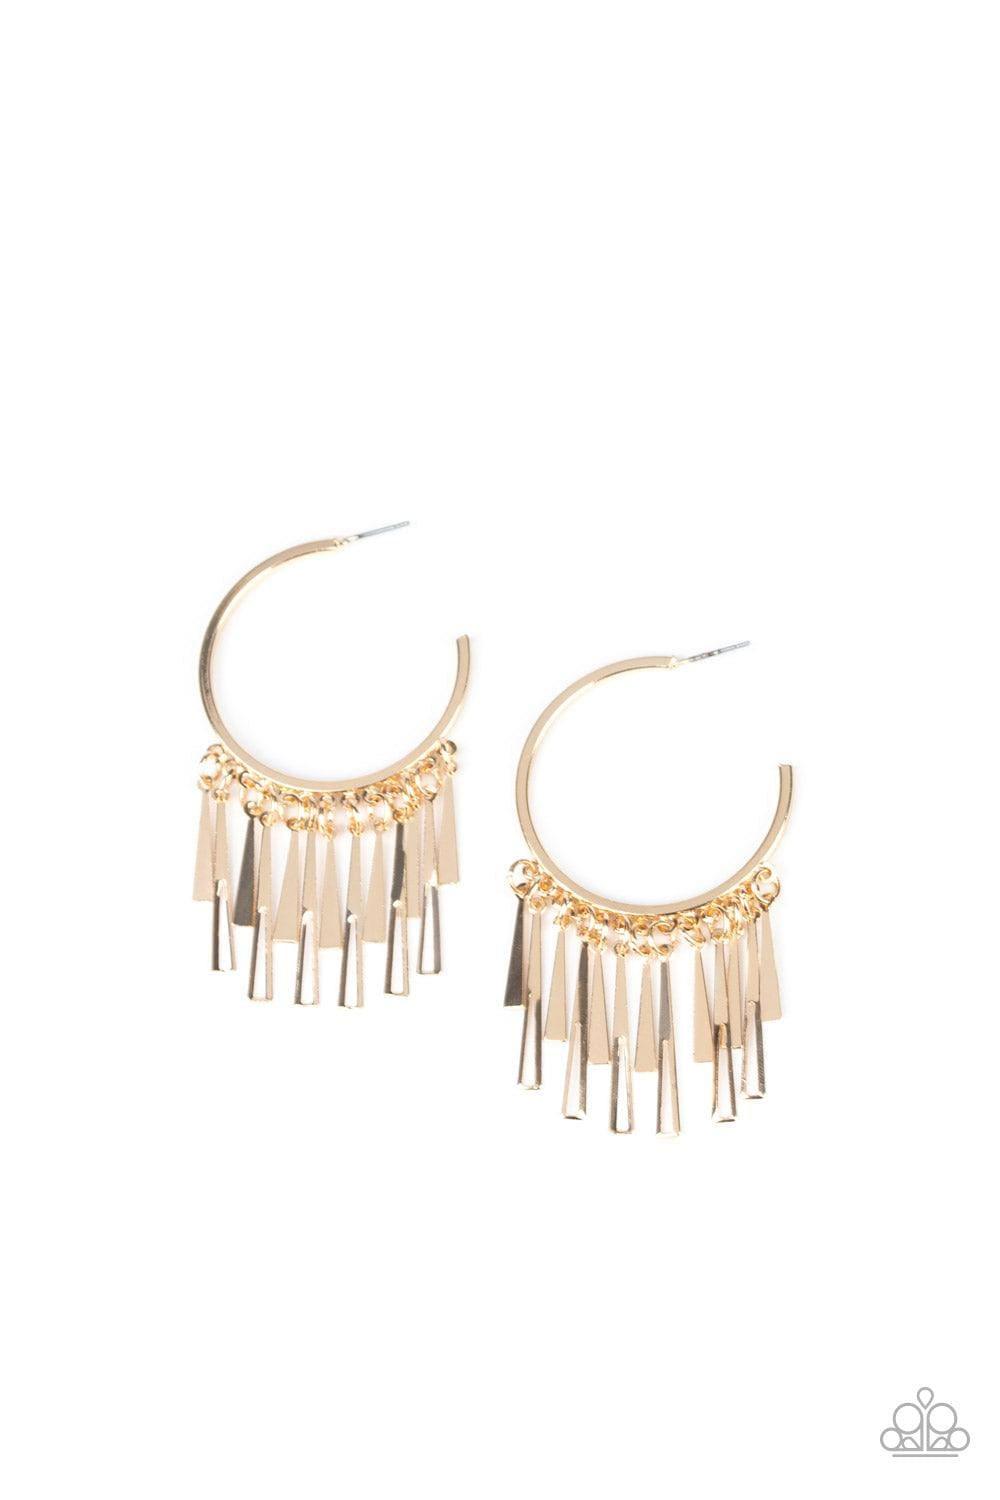 Paparazzi Accessories - Bring The Noise - Gold Earrings - Bling by JessieK